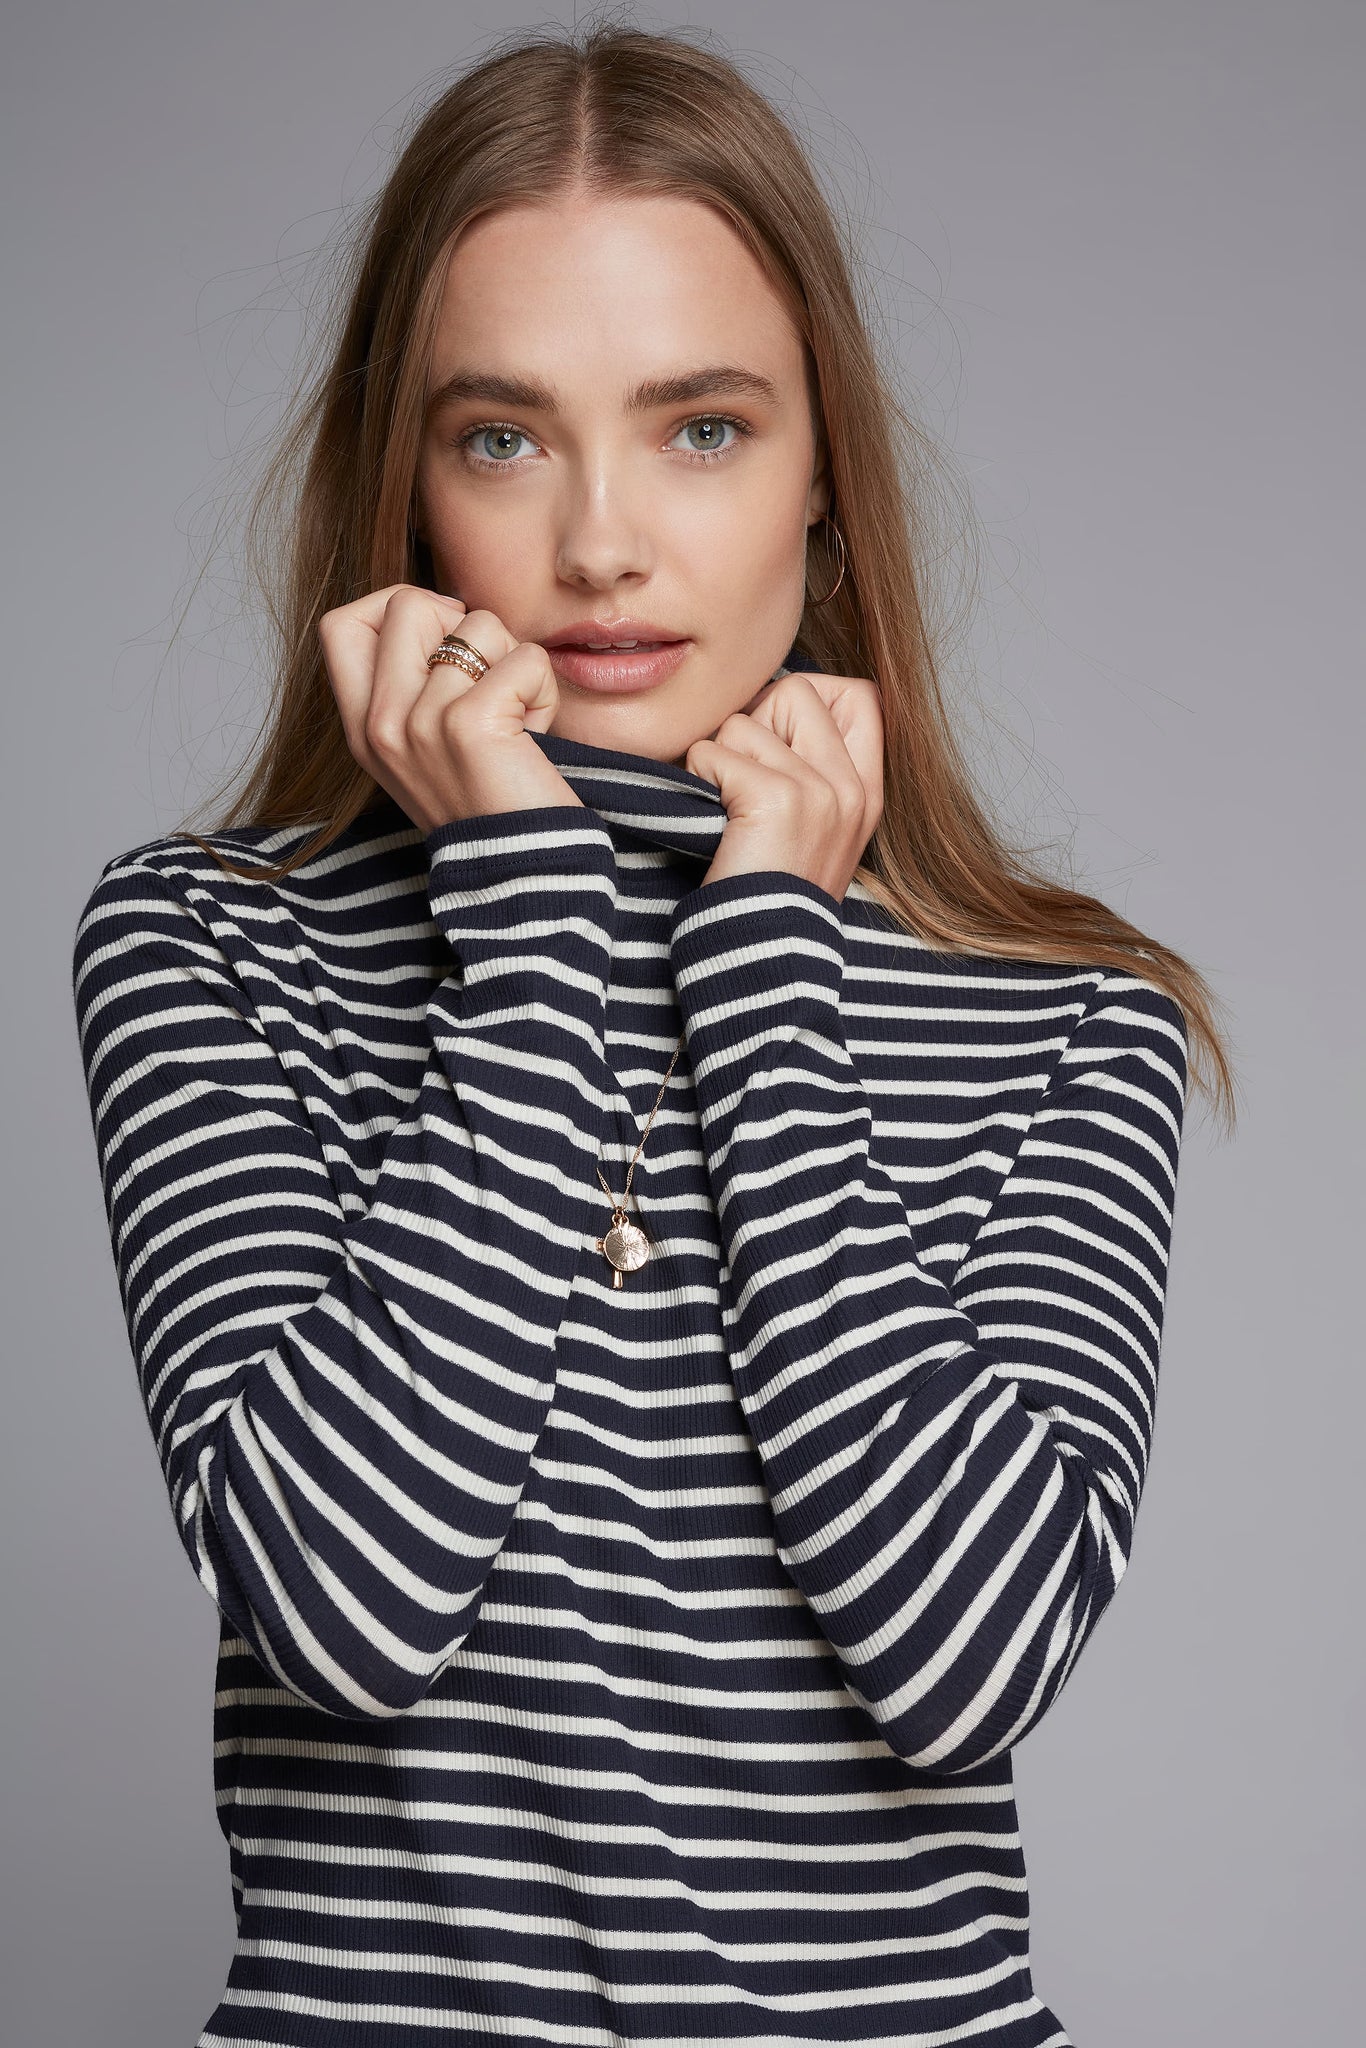 Women's Striped Cotton Roll Neck Top in Navy Ecru - Long Sleeve Stripe Cotton Roll Neck Top - Comfortable Roll Neck Top by Lavender Hill Clothing